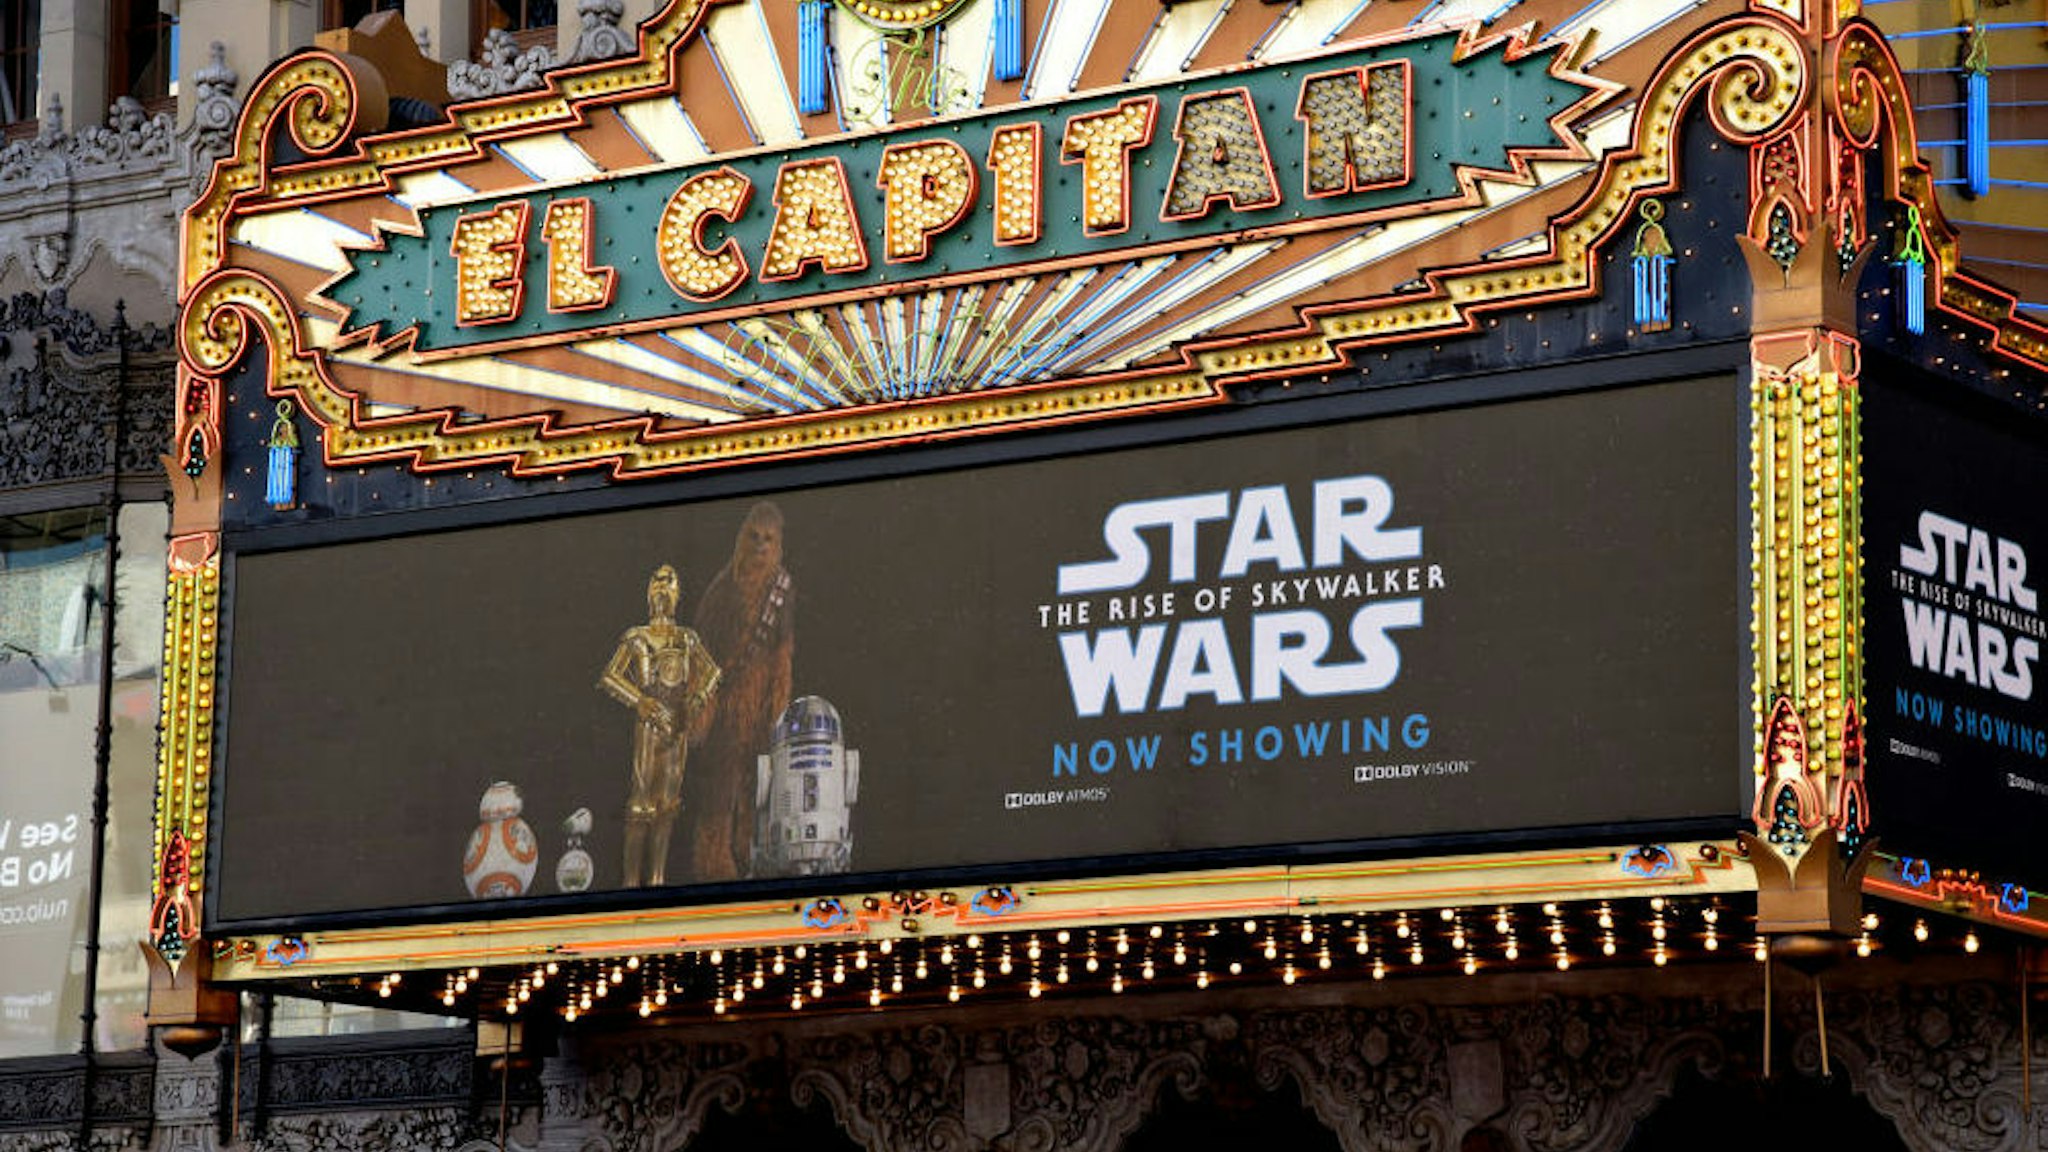 HOLLYWOOD, CALIFORNIA - DECEMBER 19: Exterior shot of the marquee of "Star Wars: The Rise Of Skywalker" at the El Capitan Theater on December 19, 2019 in Hollywood, California.